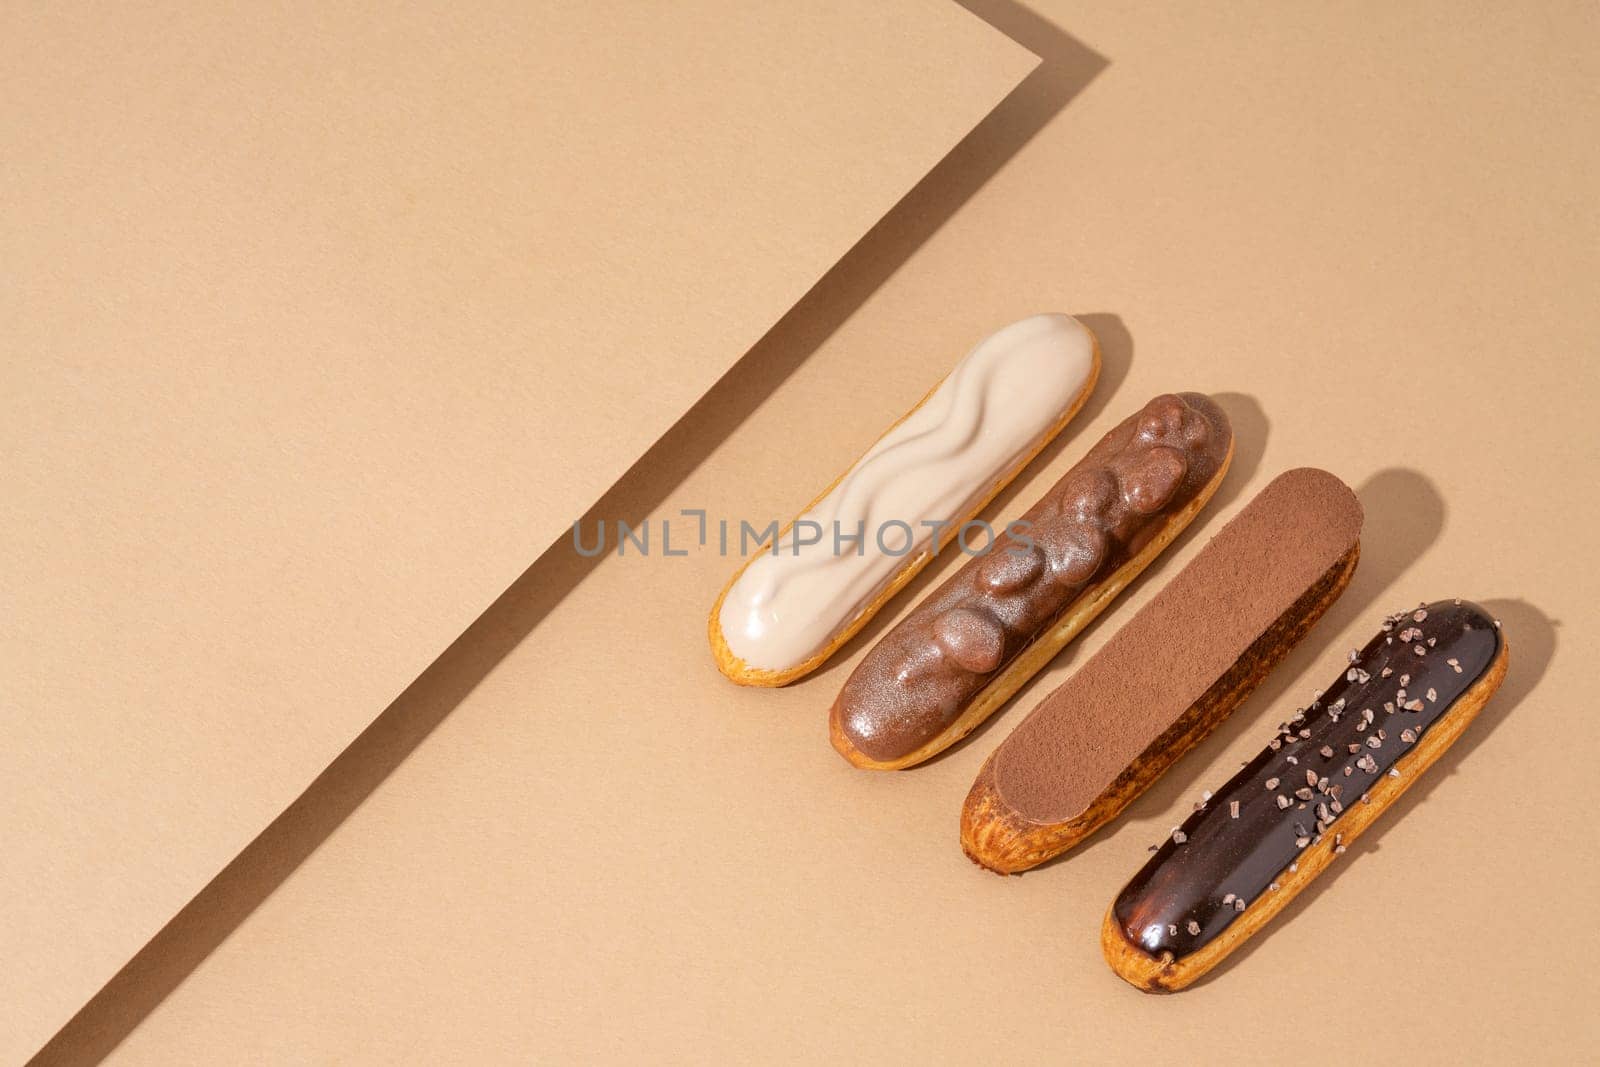 A set of delicious glazed donuts in a variety of flavors, arranged on a cardboard paper in an inviting display by A_Karim